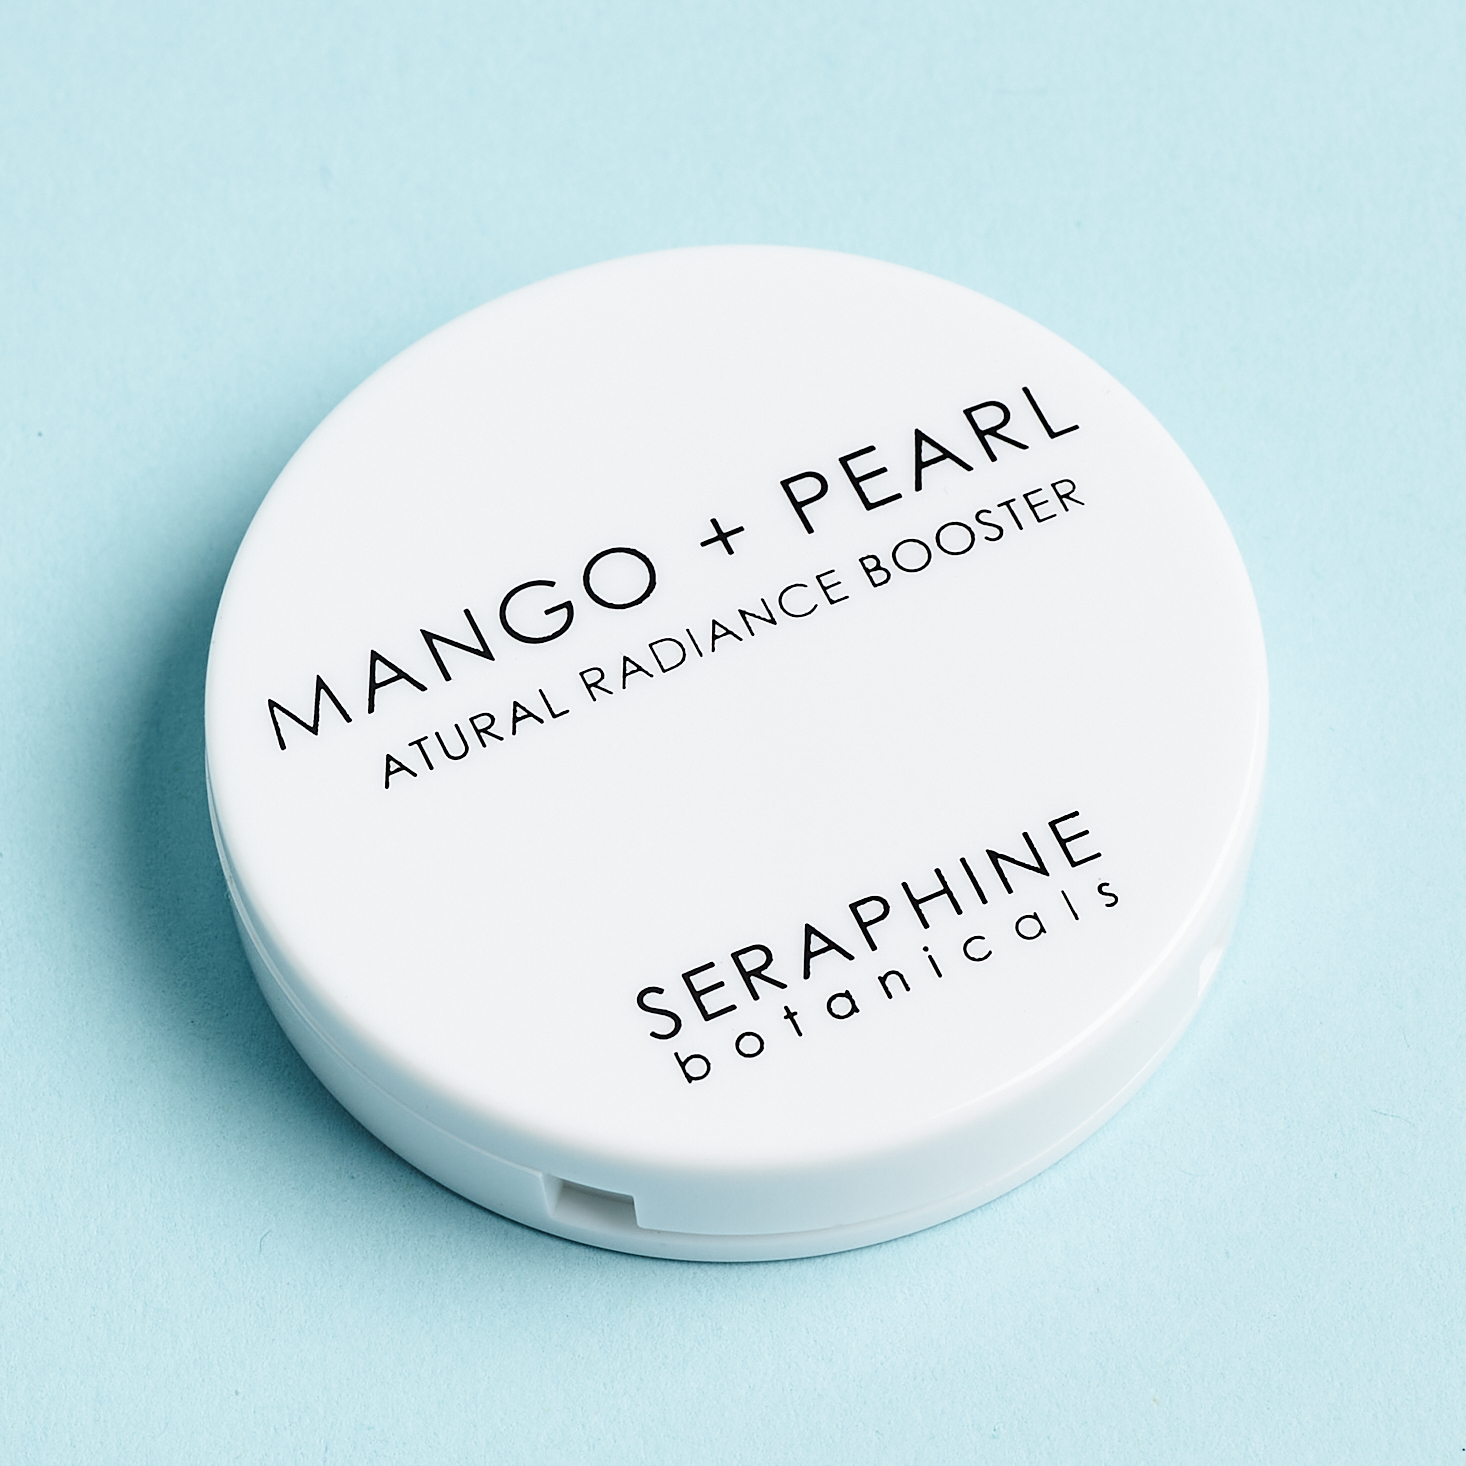 Seraphine Botanicals Mango + Pearl Natural Radiance Booster Front for Nourish Beauty Box July 2020